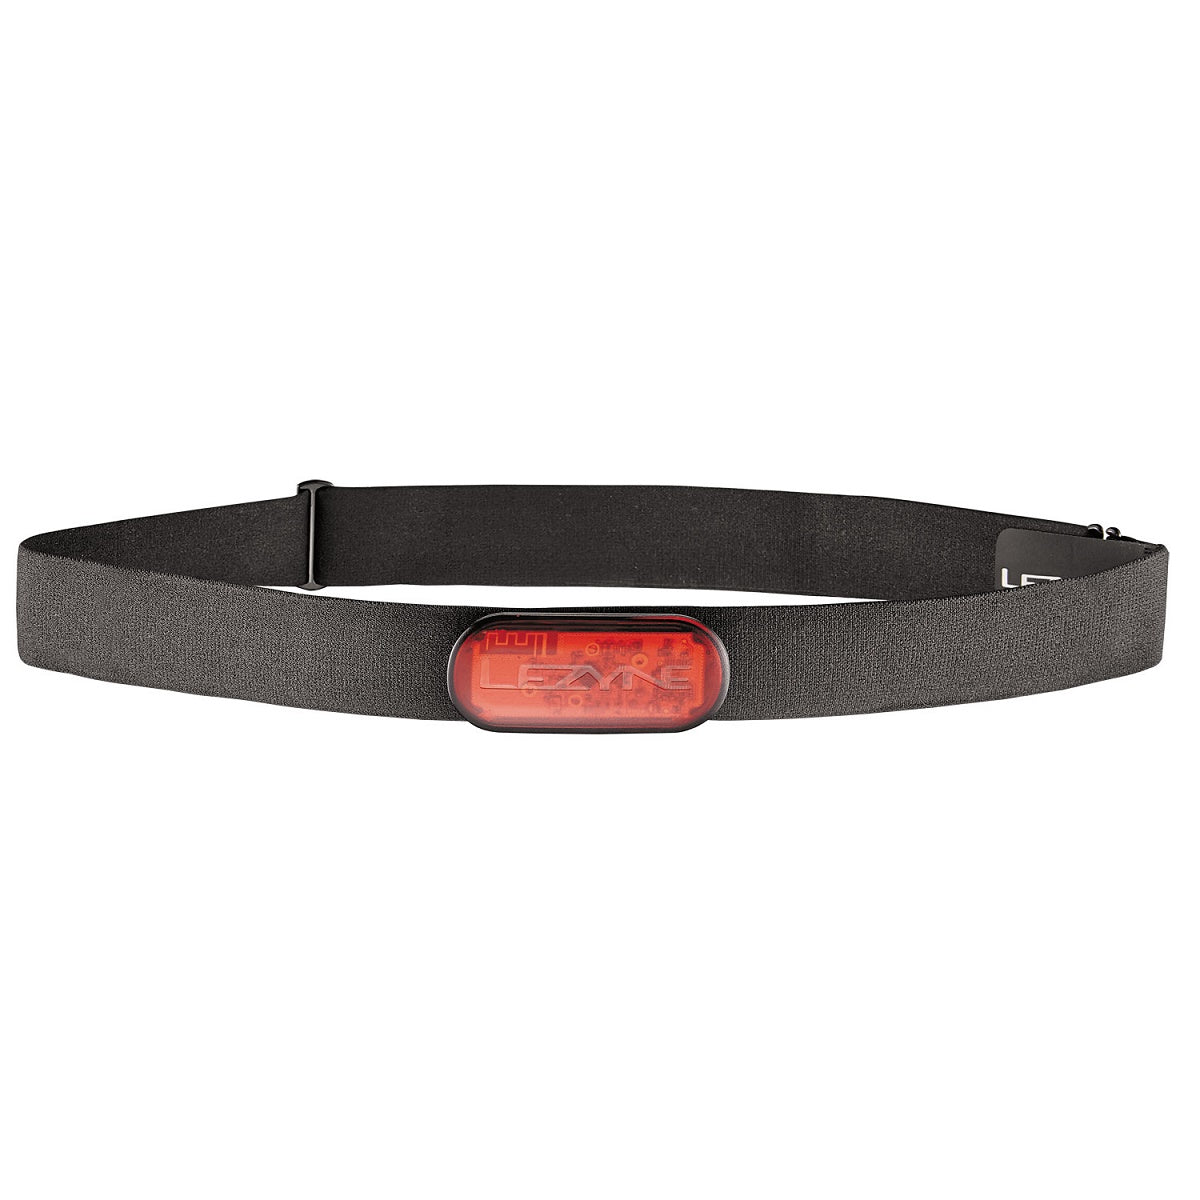 LEZYNE Heart Rate Flow Sensor with Strap